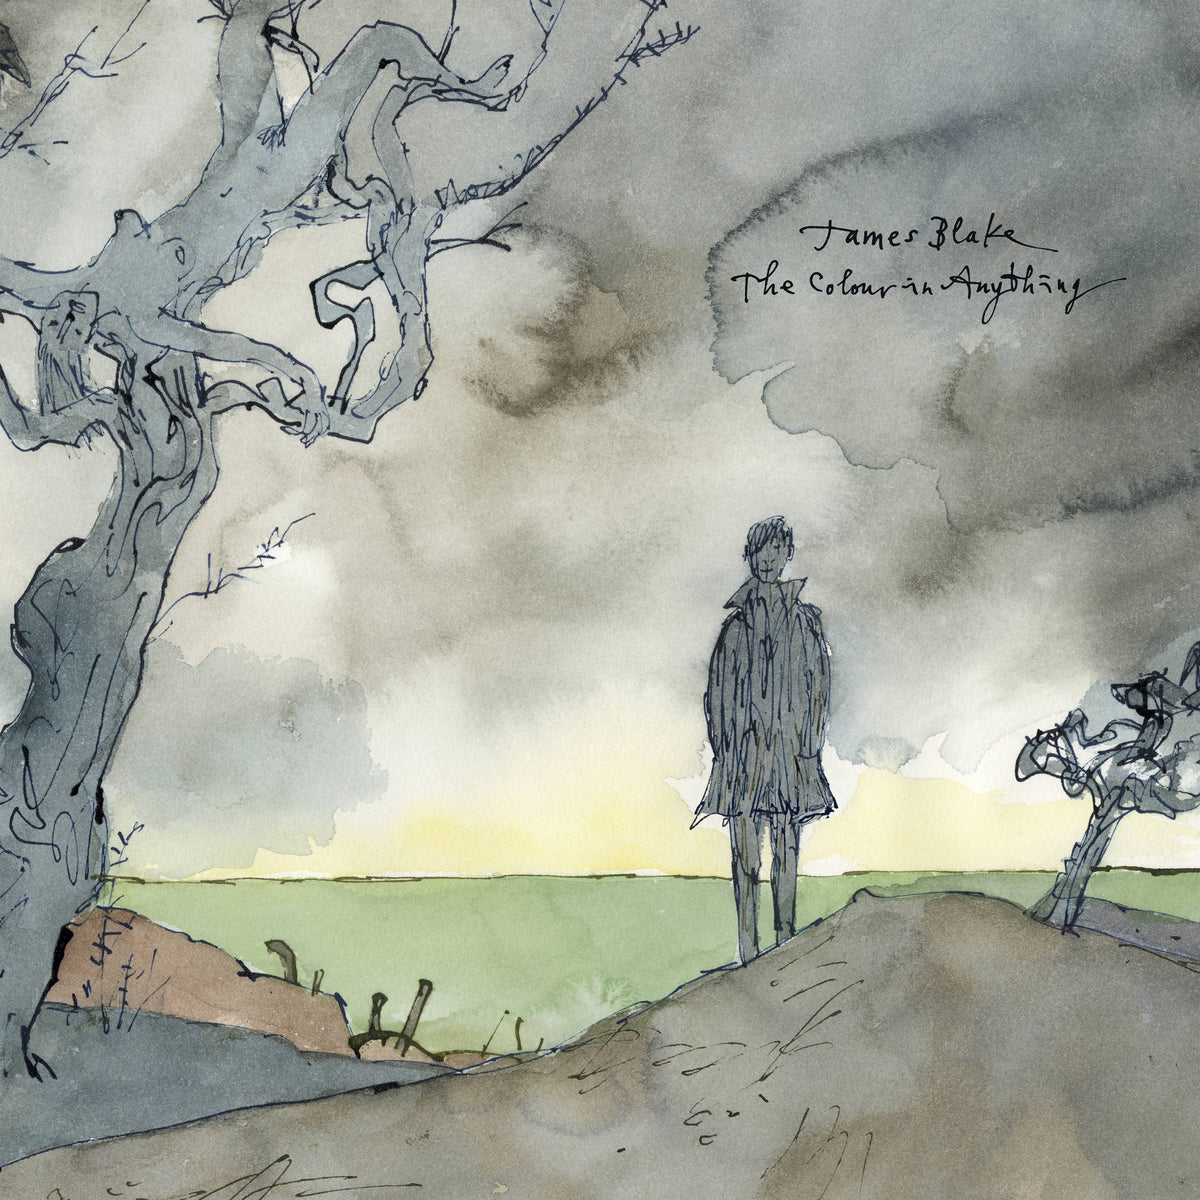 Album of the Week: James Blake The Colour In Anything